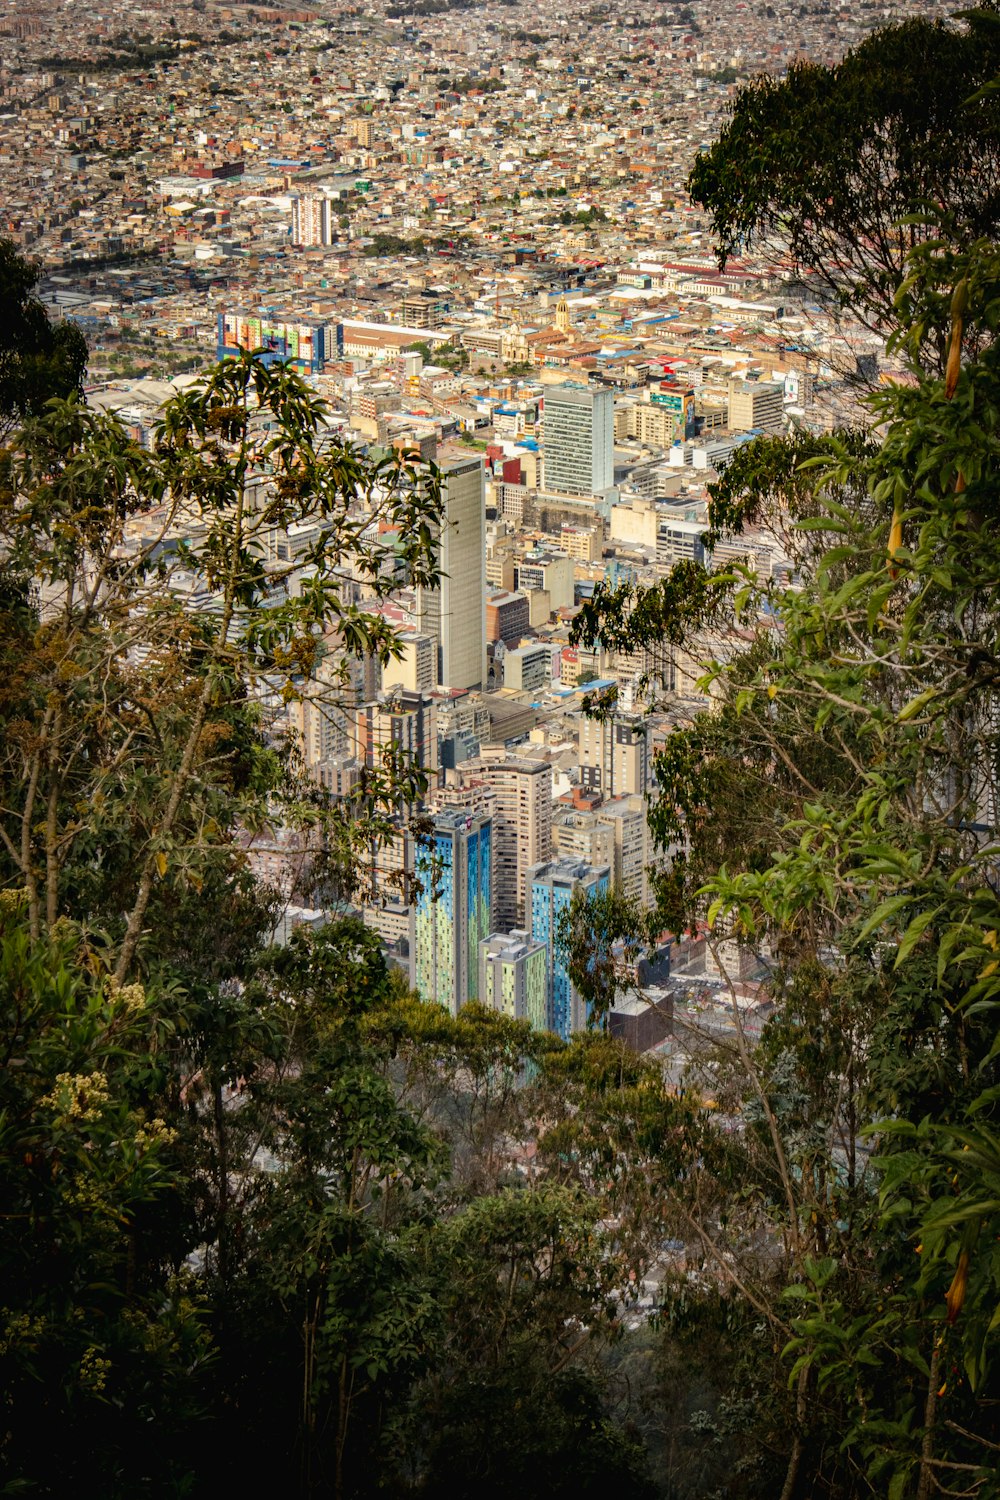 a view of a city from the top of a hill